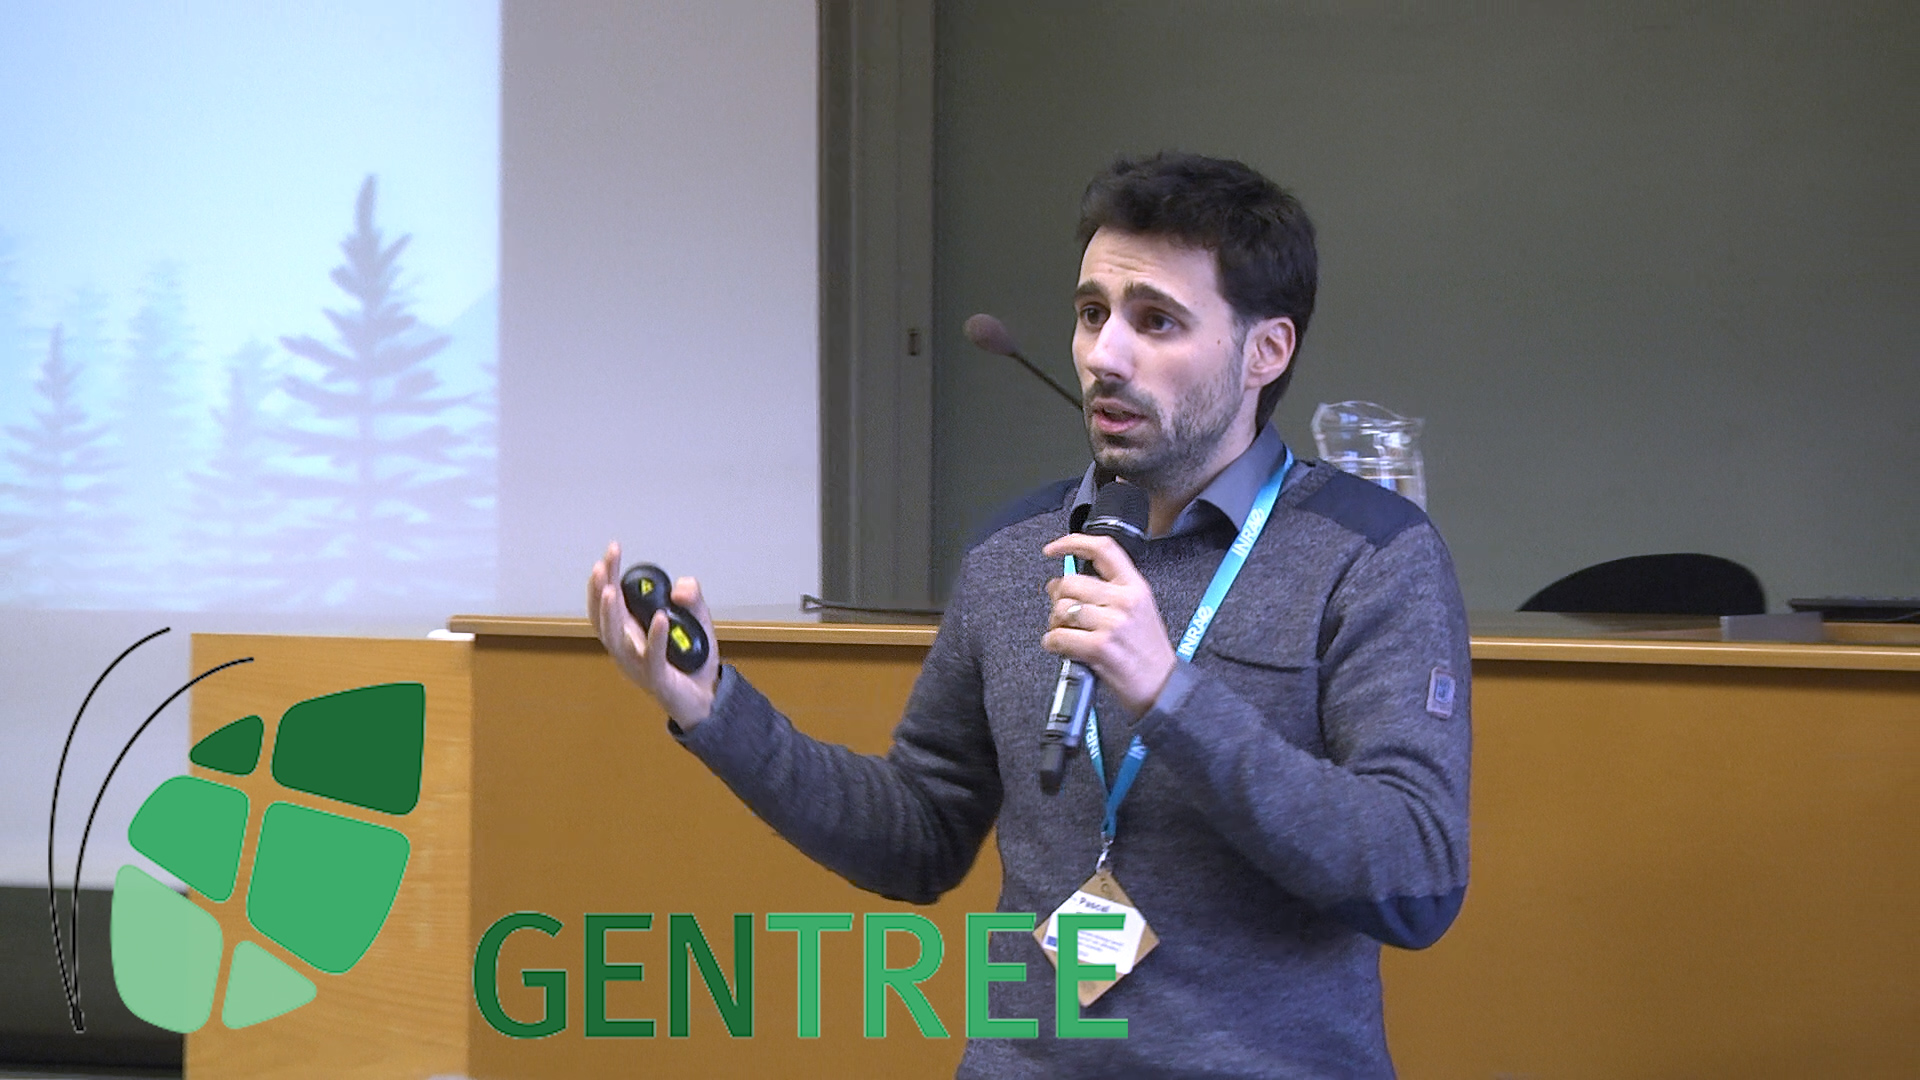 [COLLOQUE] GENTREE Final Conference 27-31 January 2020 séance 5